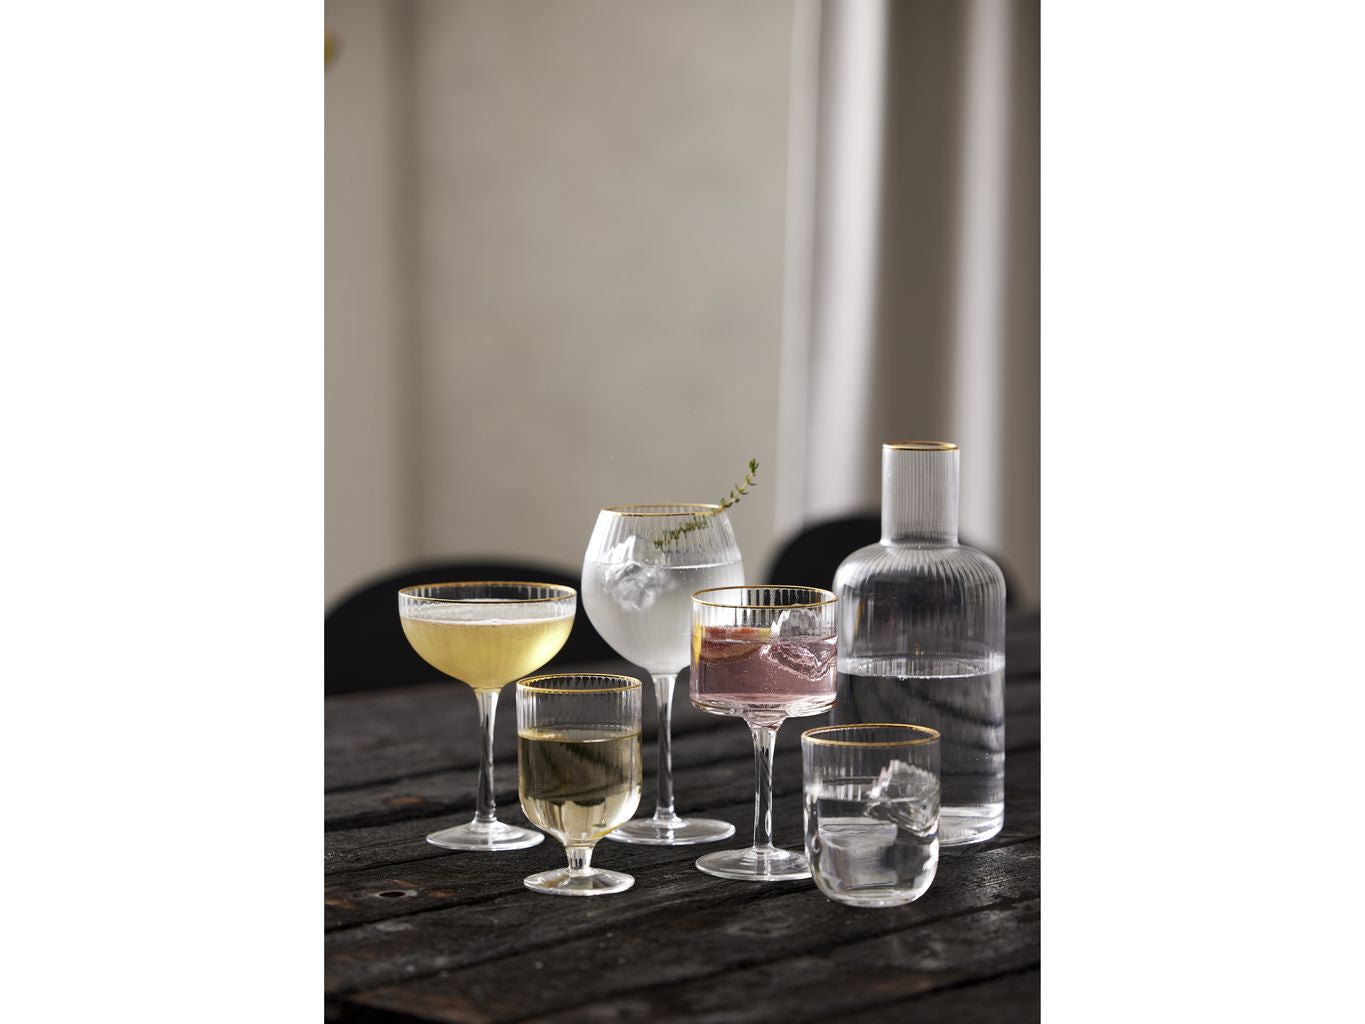 Lyngby Glas Palermo Gold Weinglas 30 Cl, 4 Stcs.